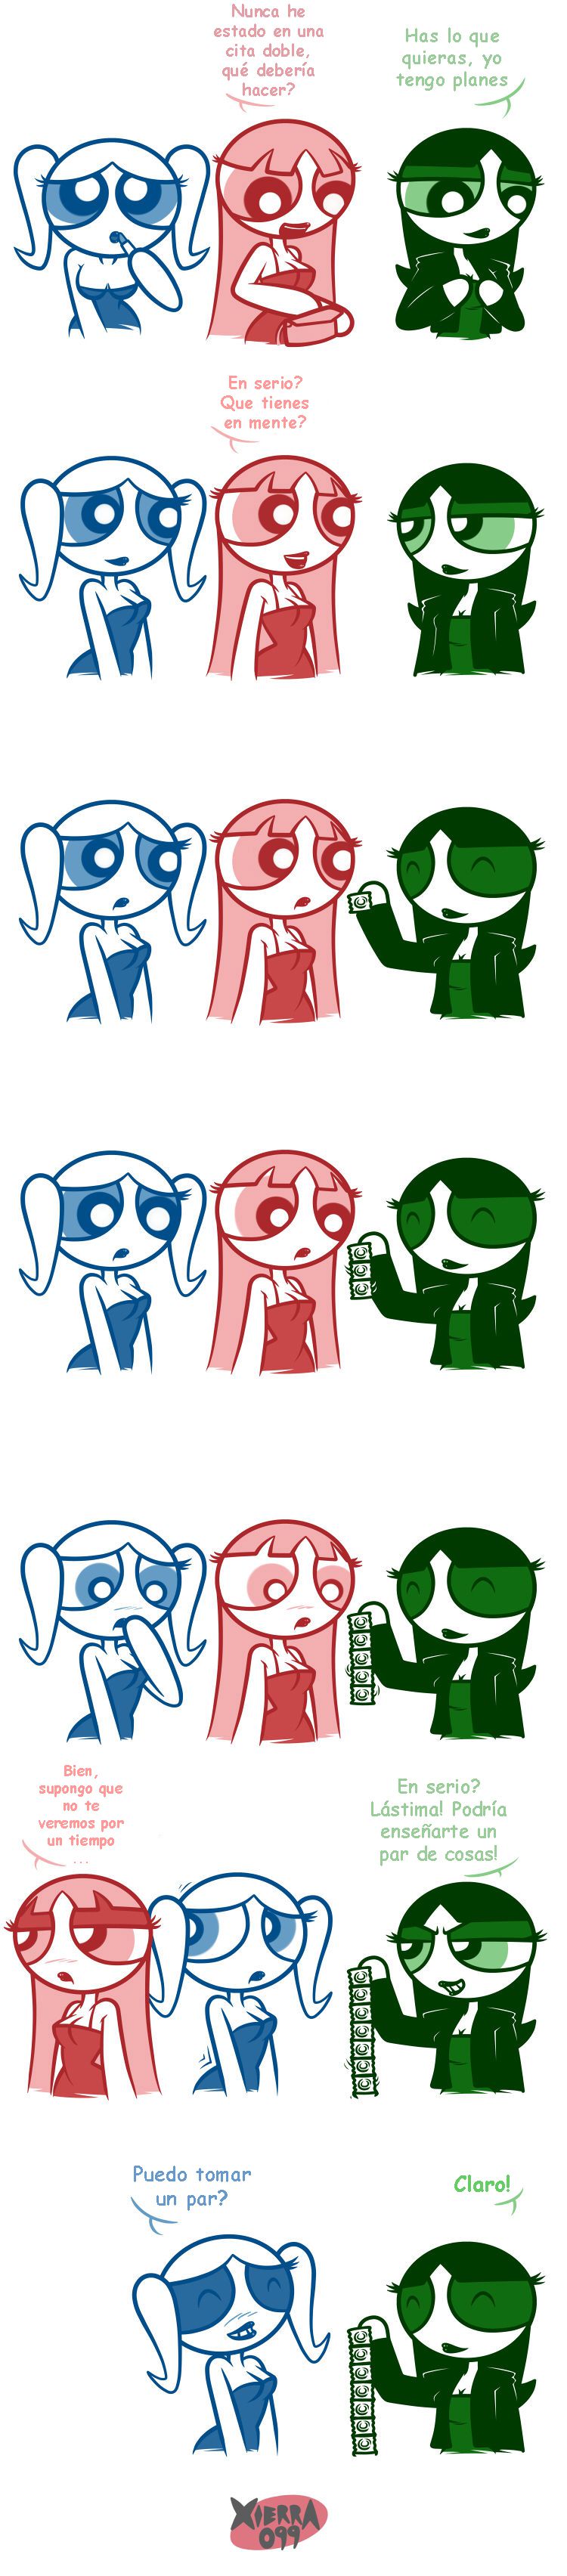 [Xierra099] PPG Strips [Ongoing] Spanish 17